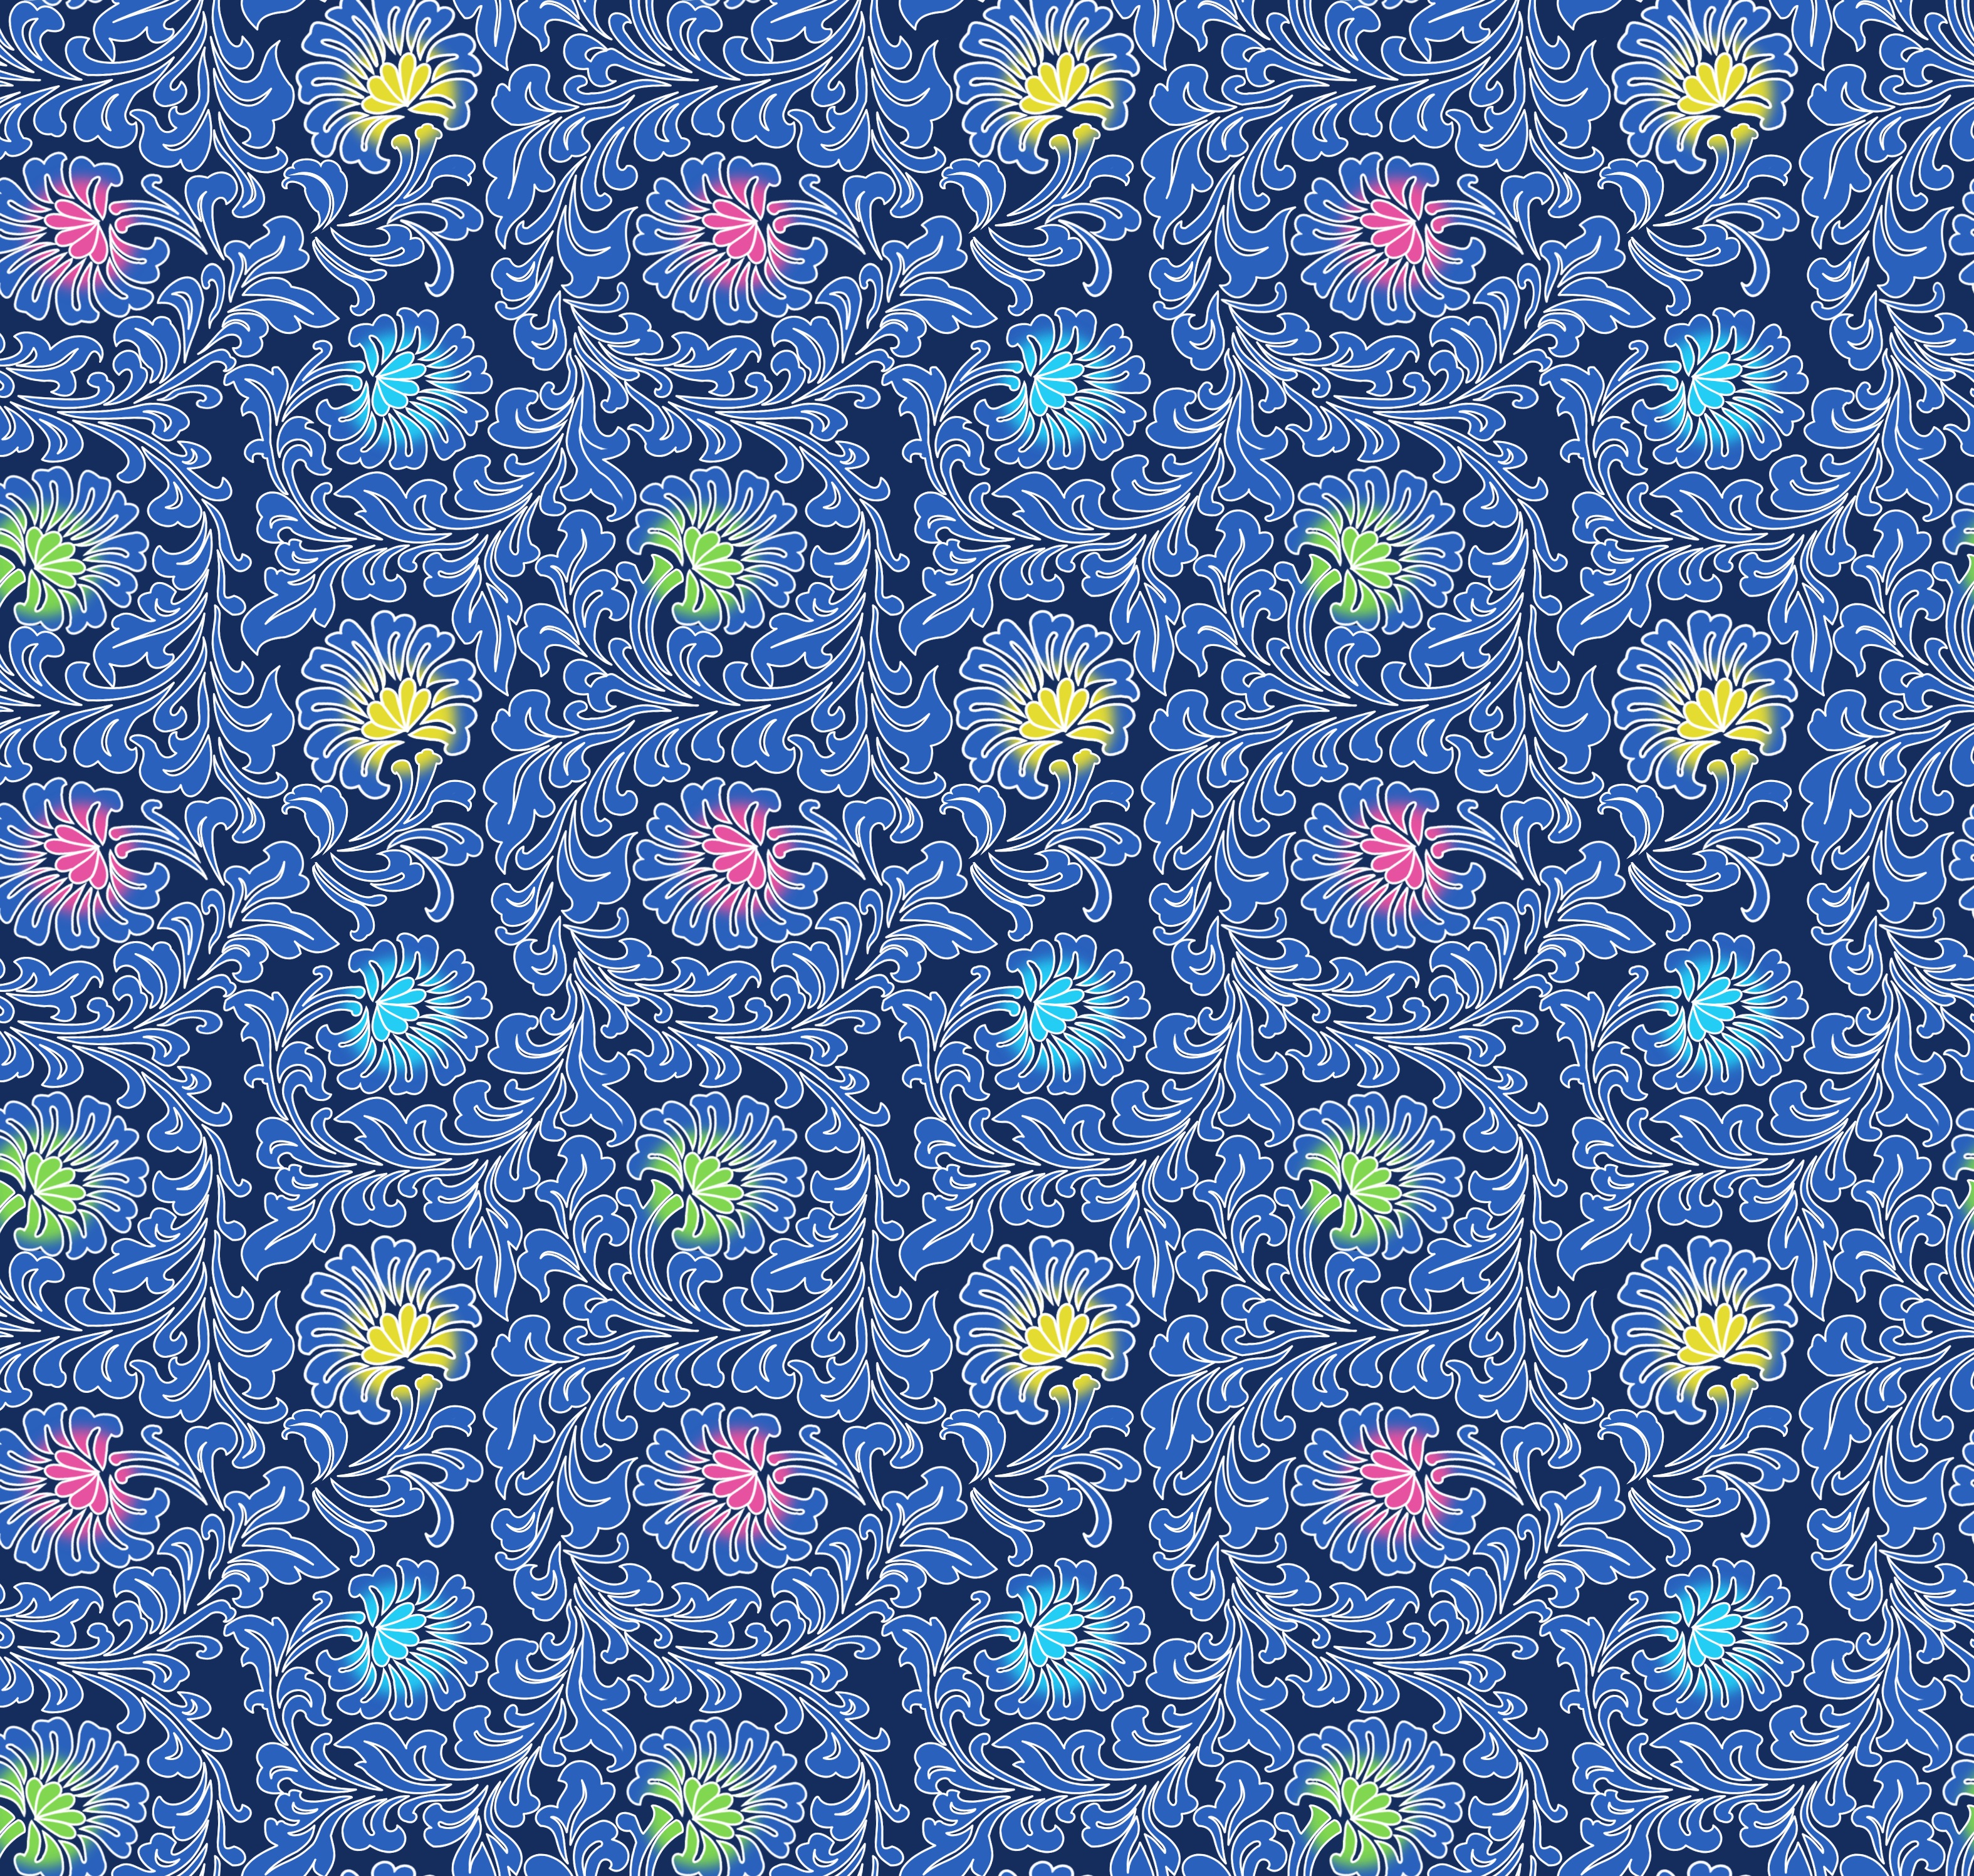 textures, flowers, asia, patterns, blue, texture, seamless Full HD